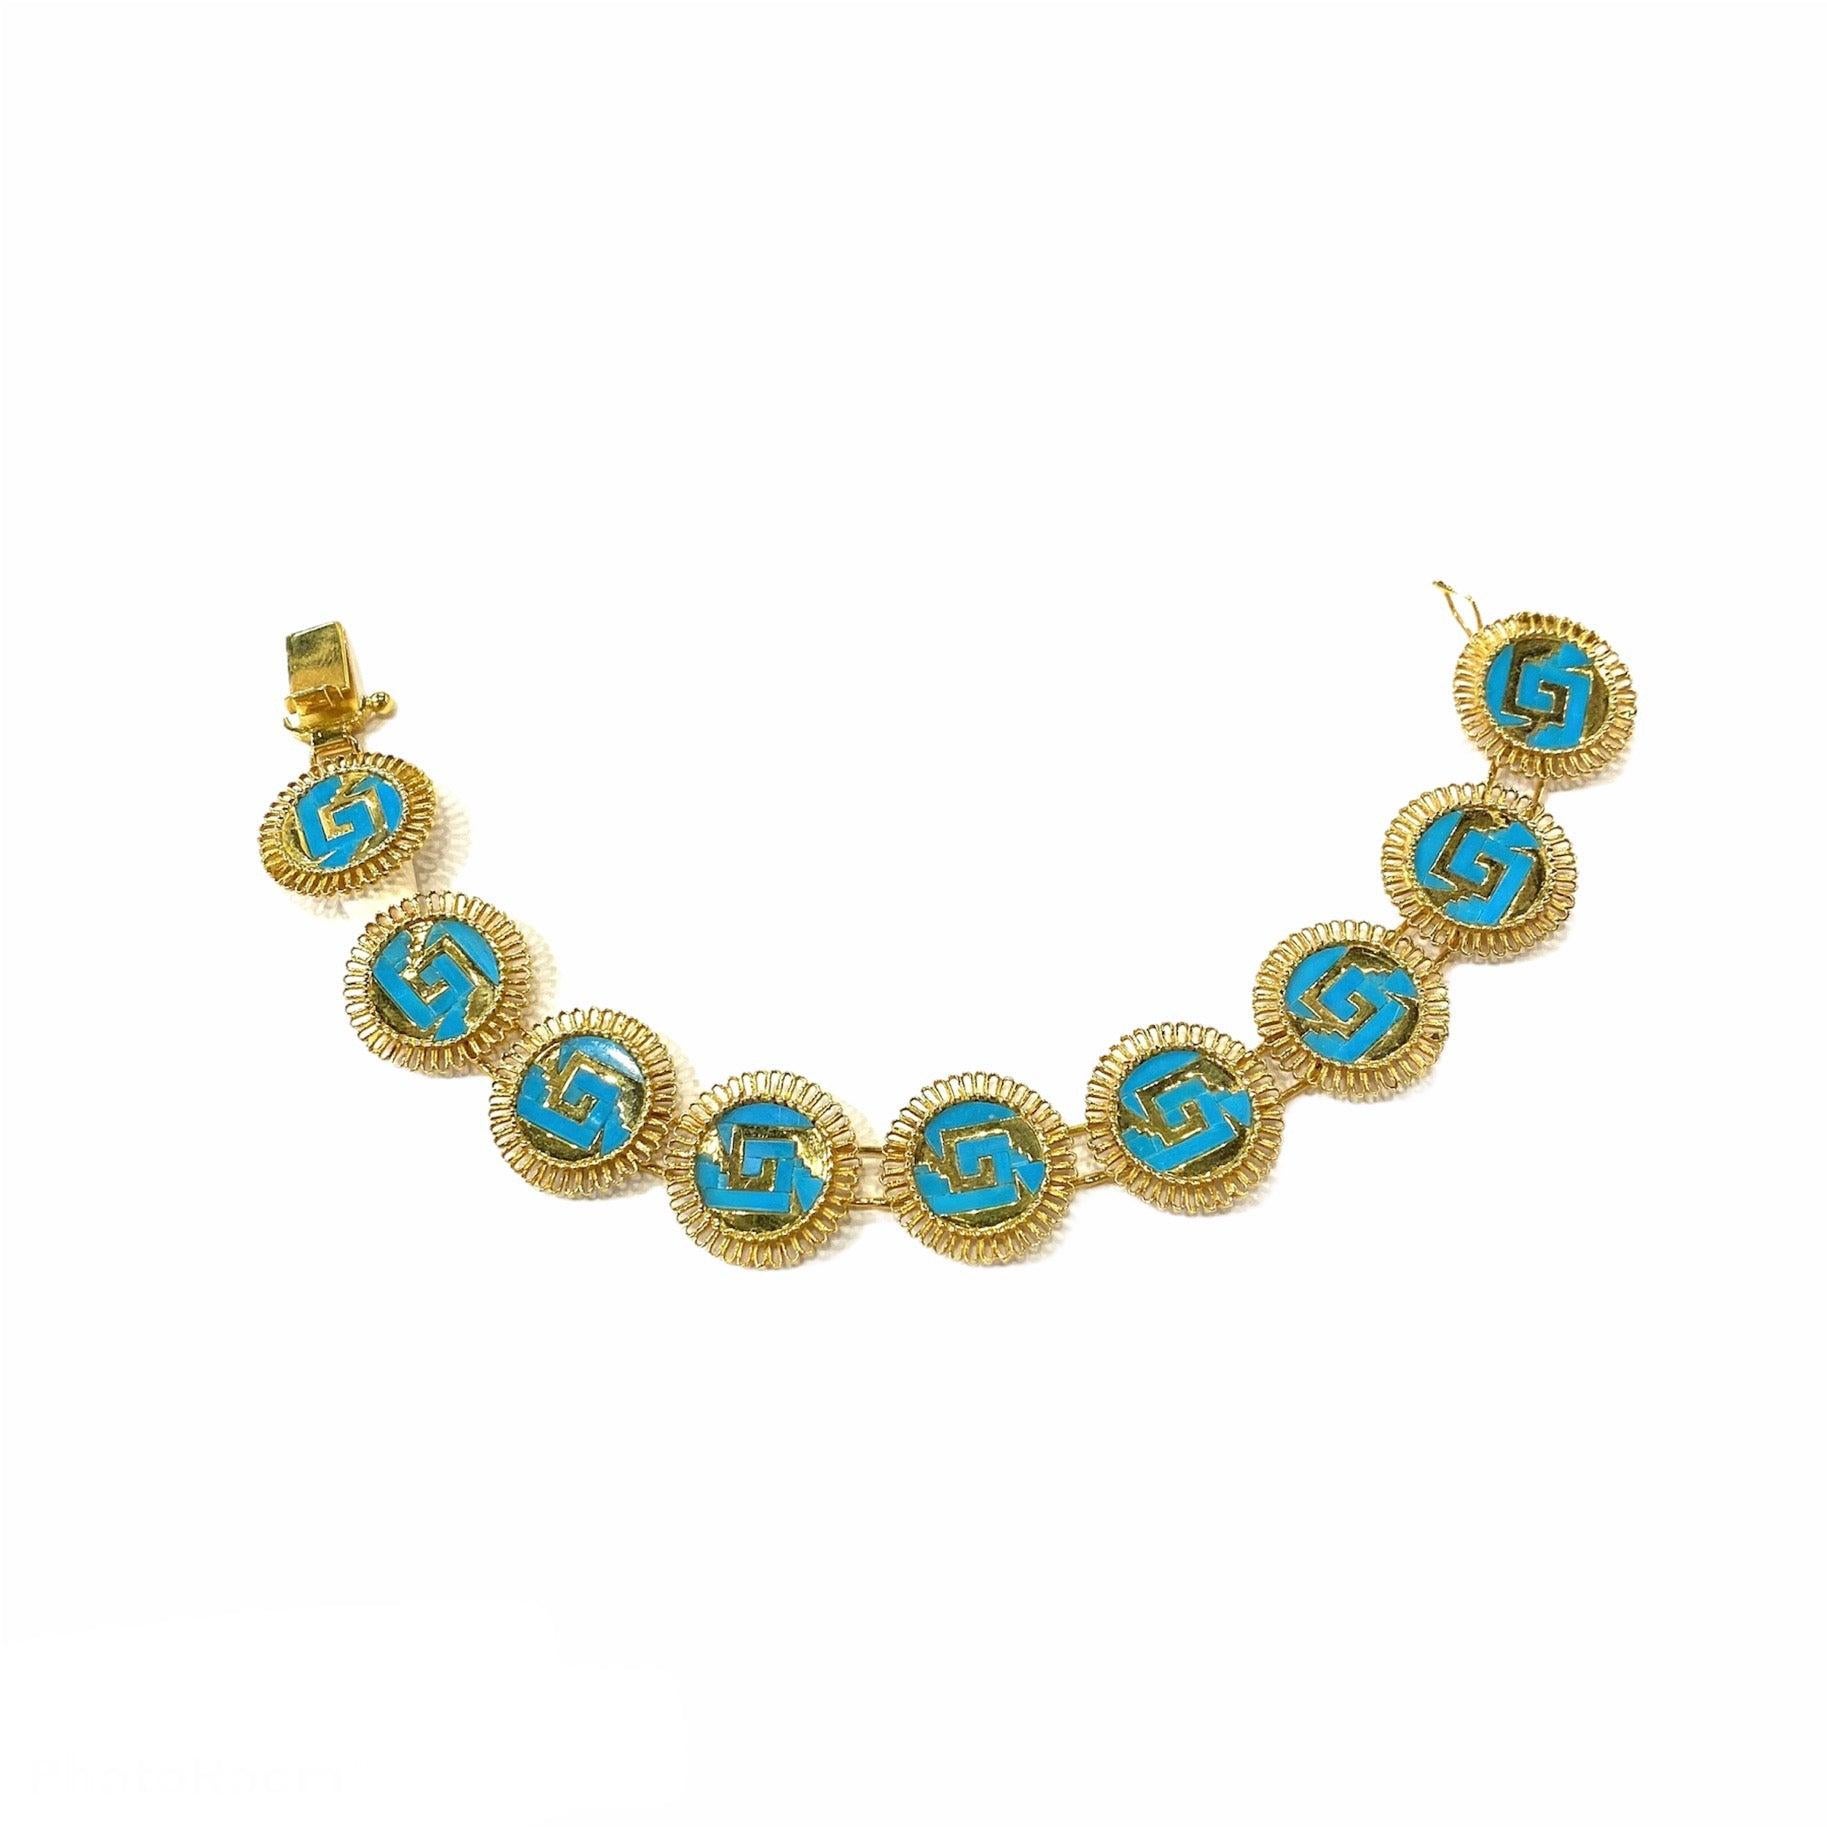 Oro de Monte Alban 14k Gold and Turquoise Bracelet. In New Condition For Sale In Dallas, TX